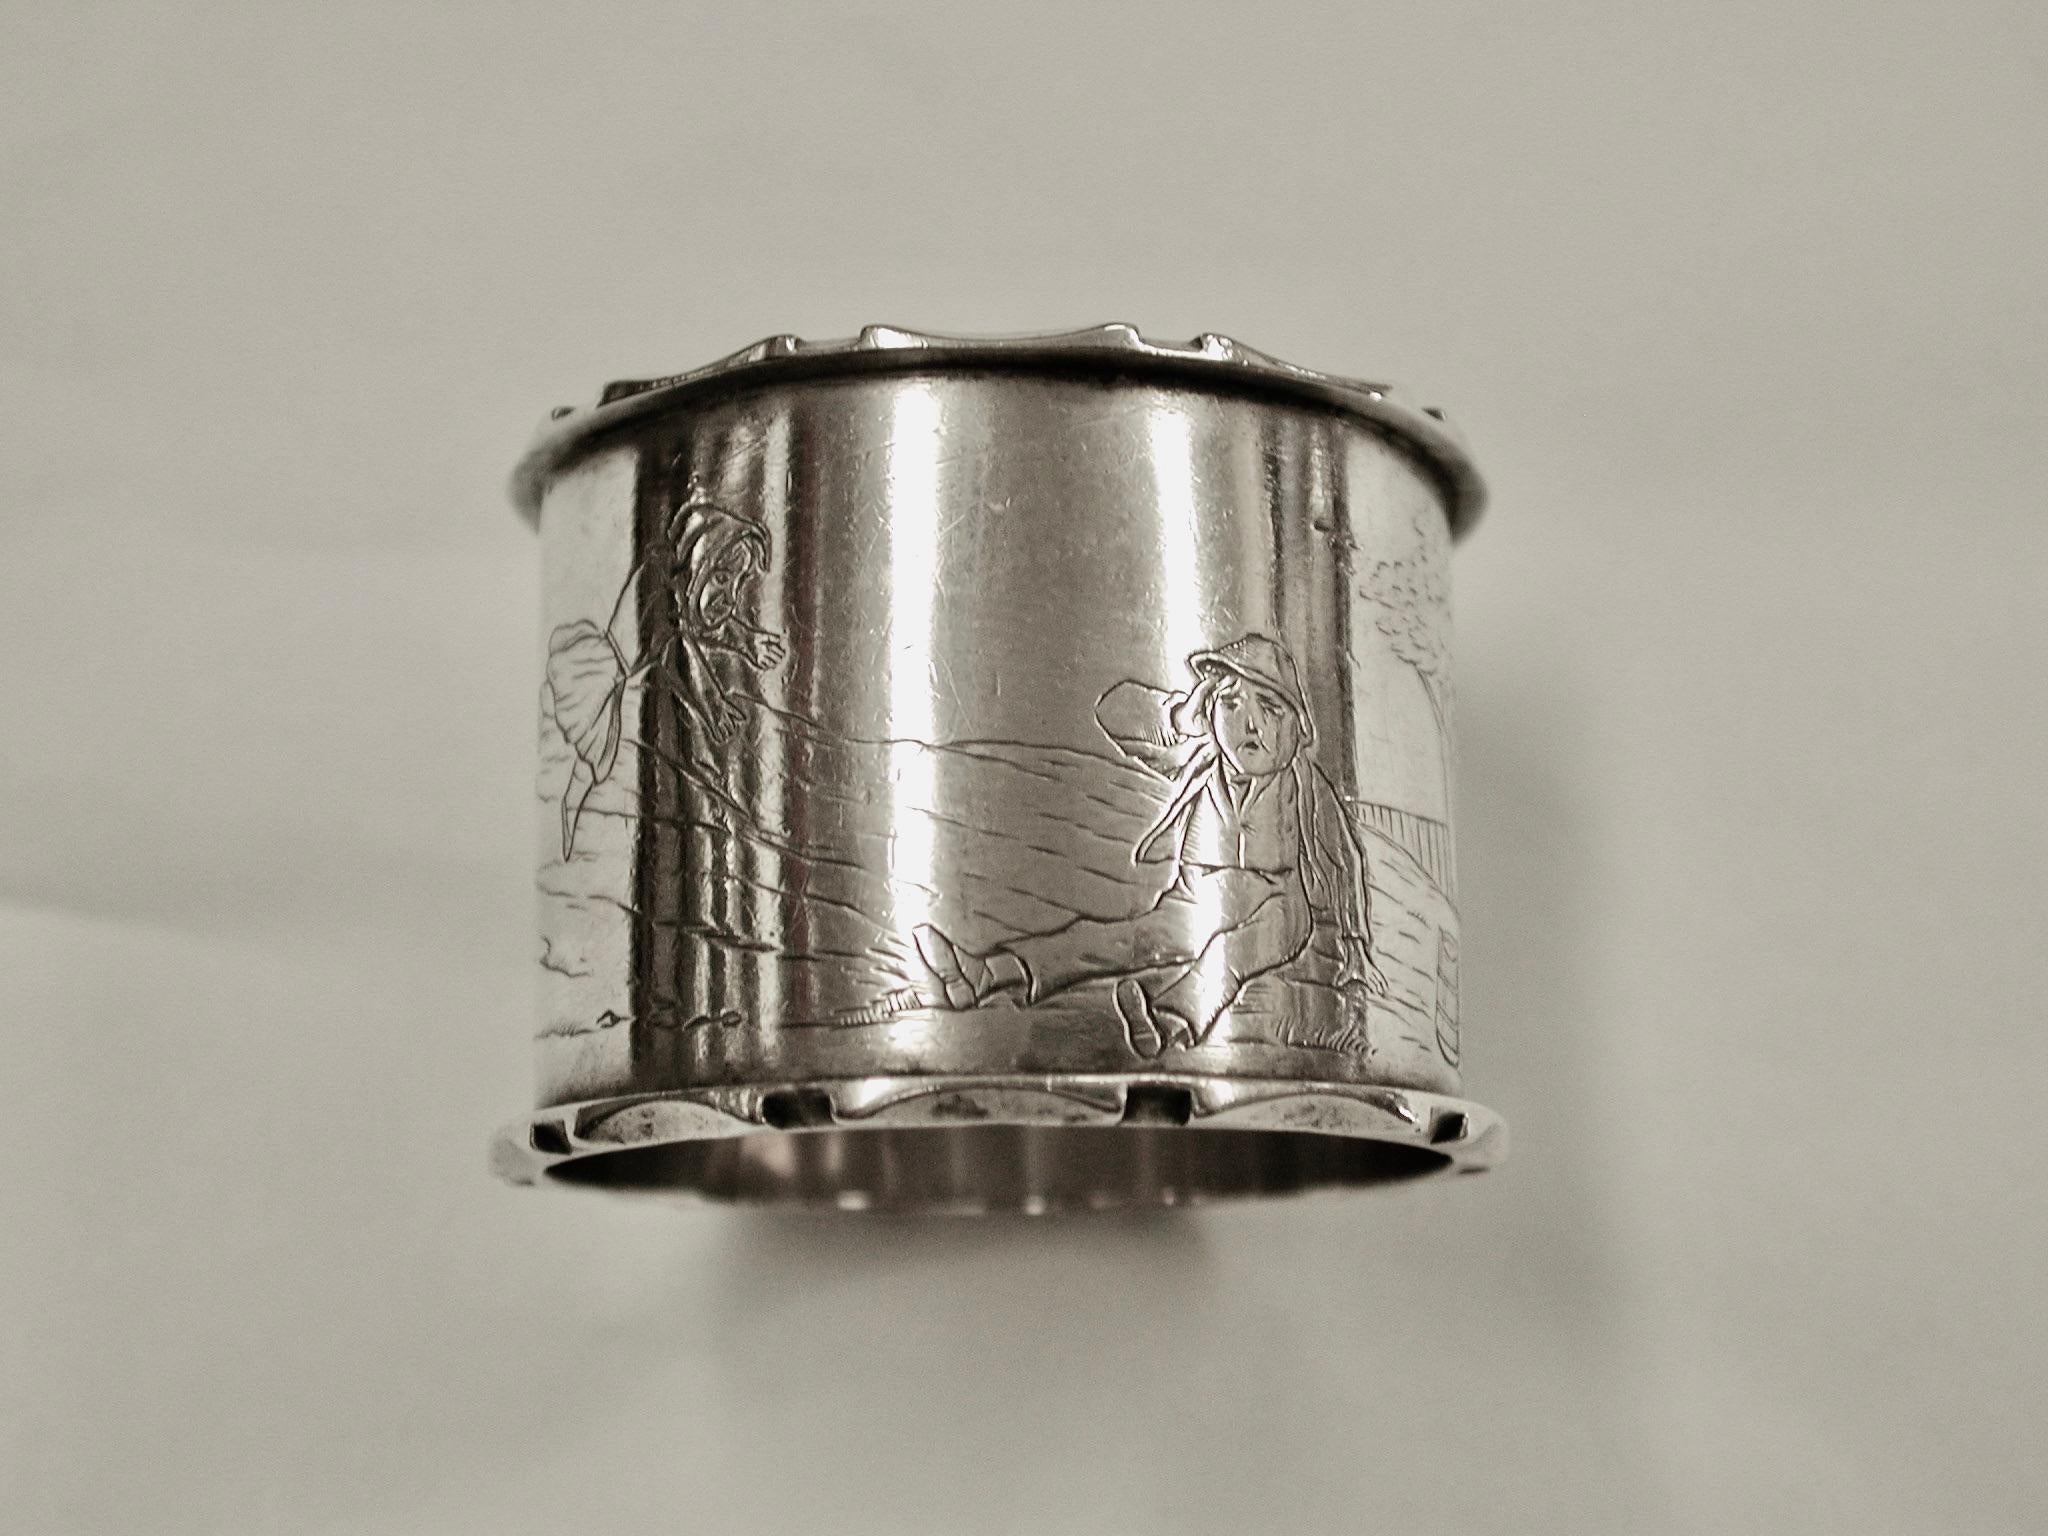 Antique Victorian Silver Jack & Jill Napkin Ring Dated 1883,London
 Made by Alfred Hall & John Goode, beautifully engraved with the 